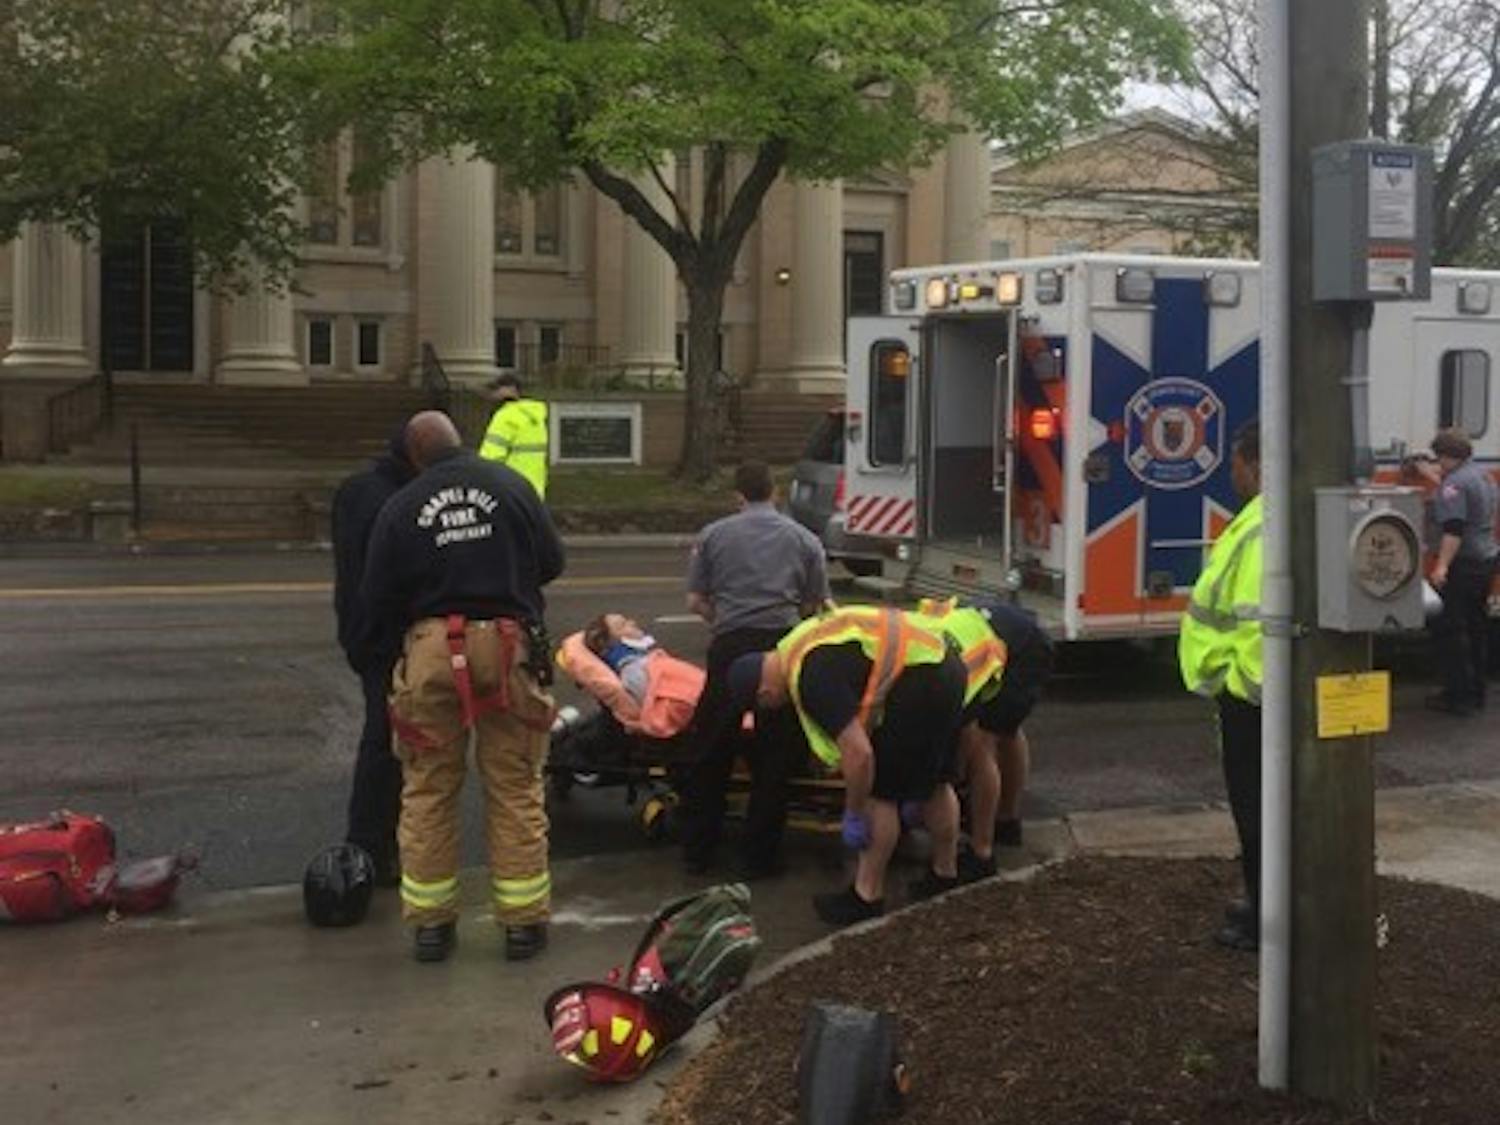 A female University student was hit by a car on Columbia Street by Top of the Hill. She was taken to the hospital at approximately 1:56 p.m.